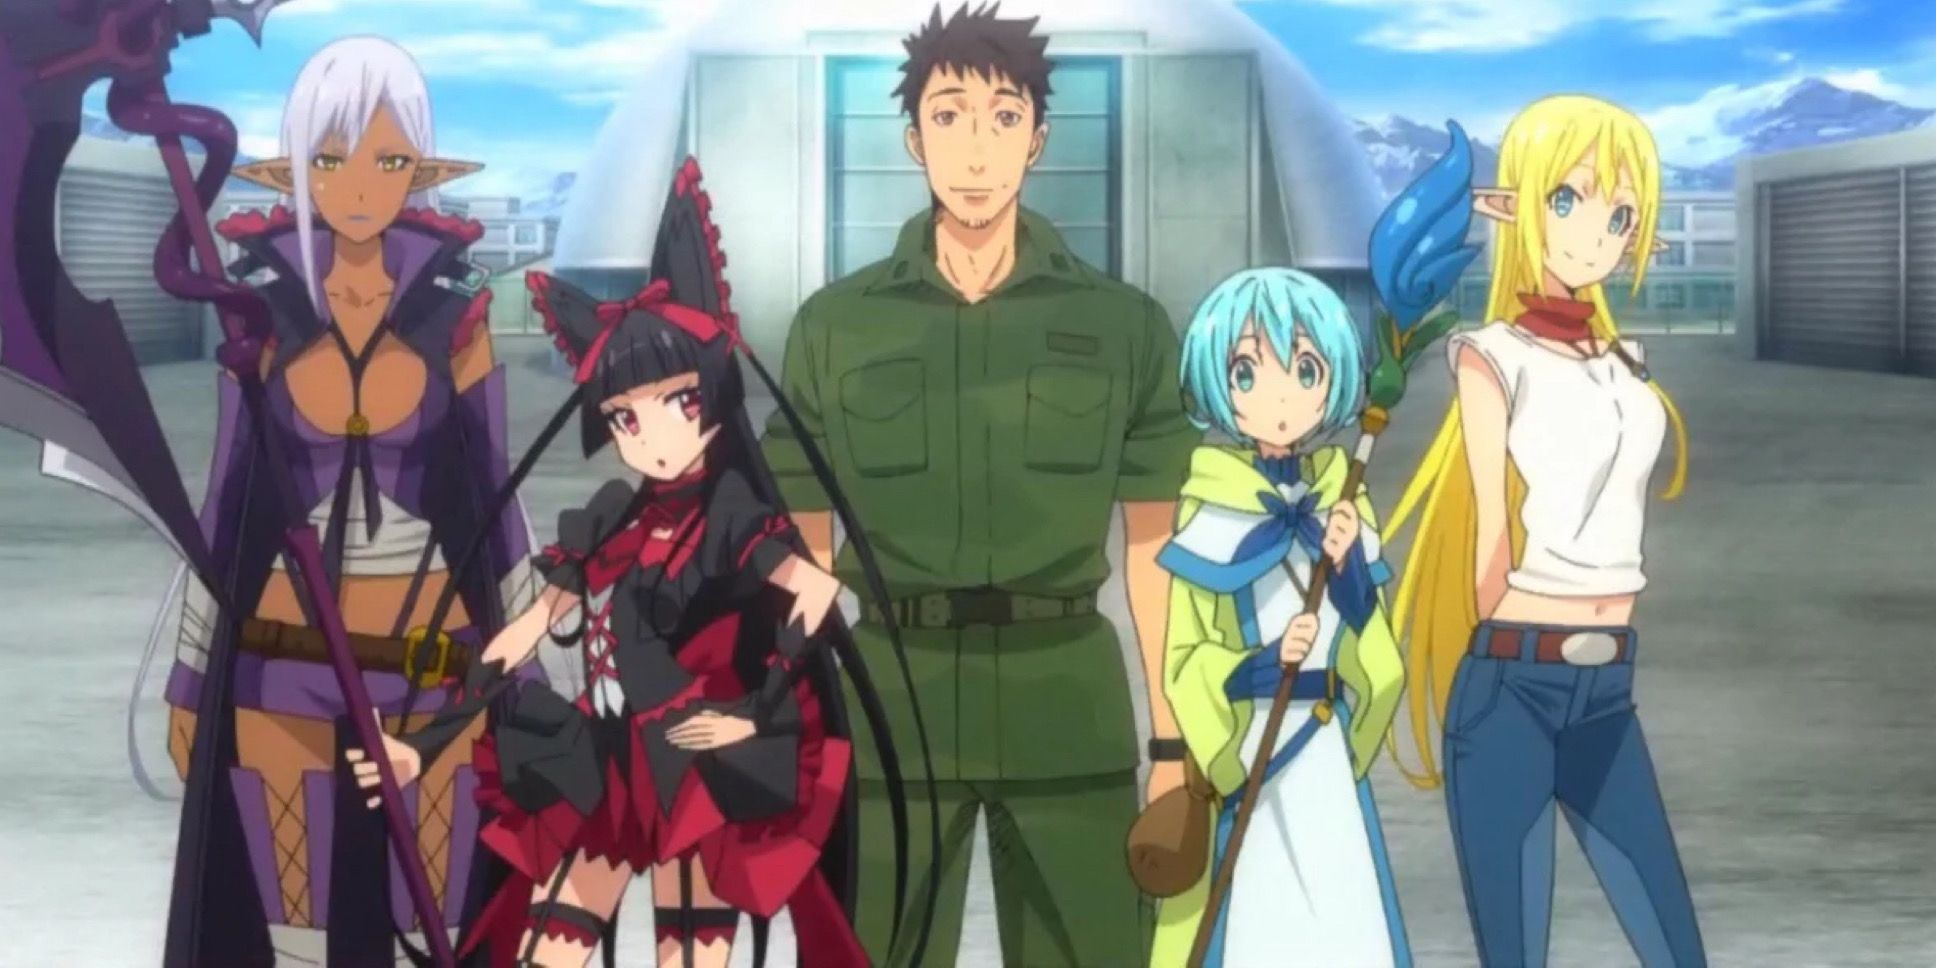 The main cast of the GATE anime